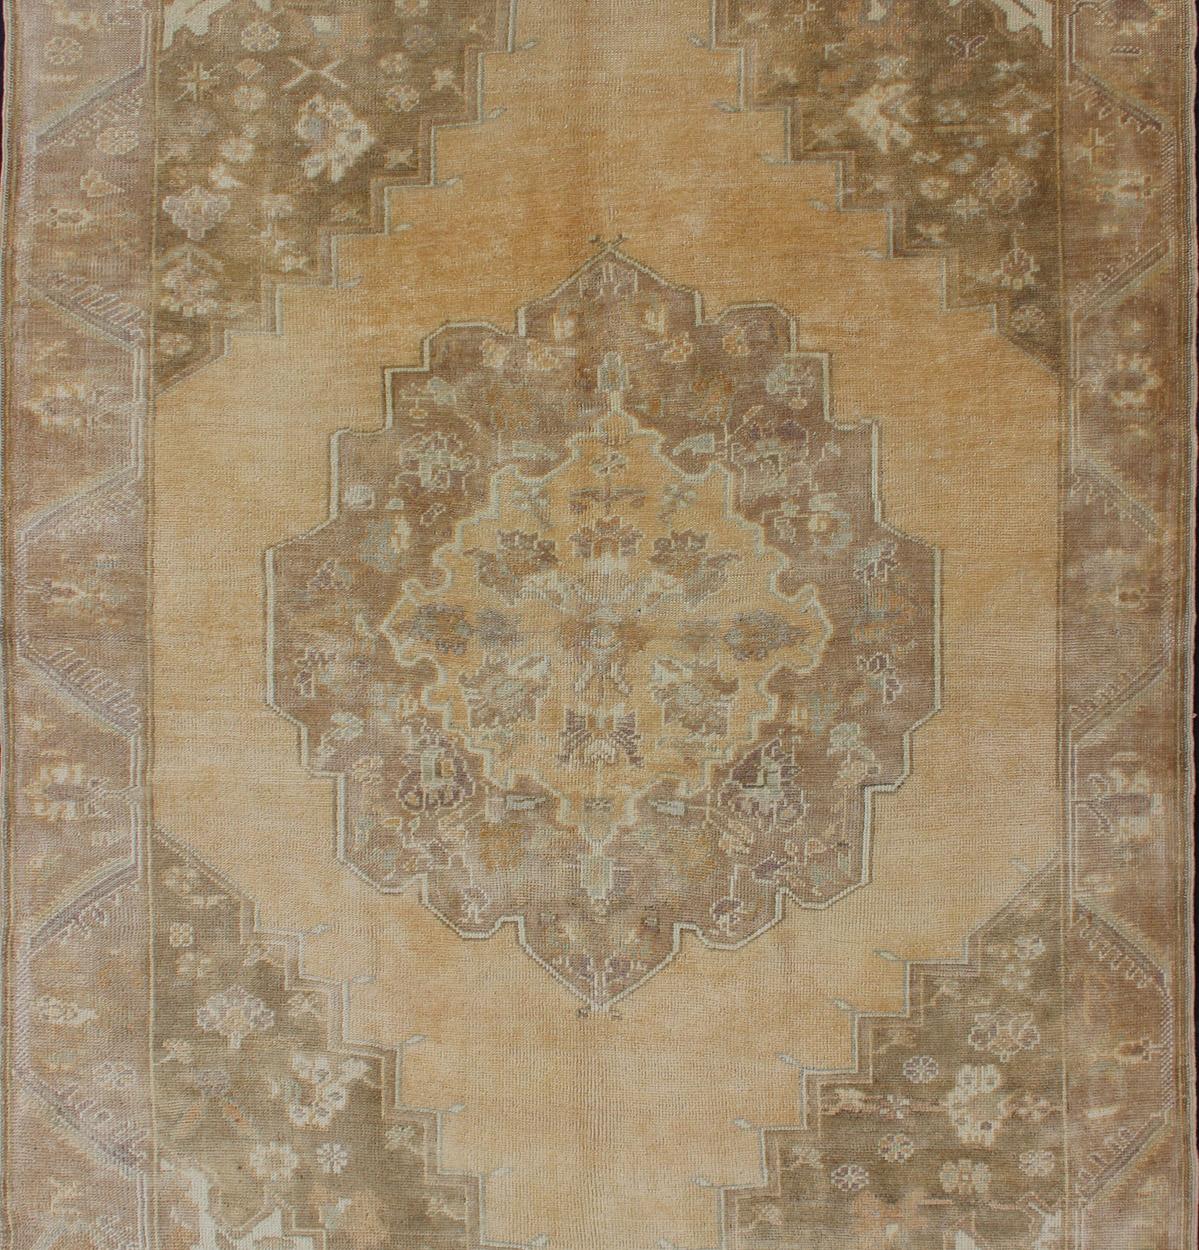 Taupe, buttery and light brown Turkish Oushak vintage rug with floral central medallion, rug en-3925, country of origin / type: Turkey / Oushak, circa mid-20th century.

This vintage Turkish Oushak rug (circa mid-20th century) features a unique